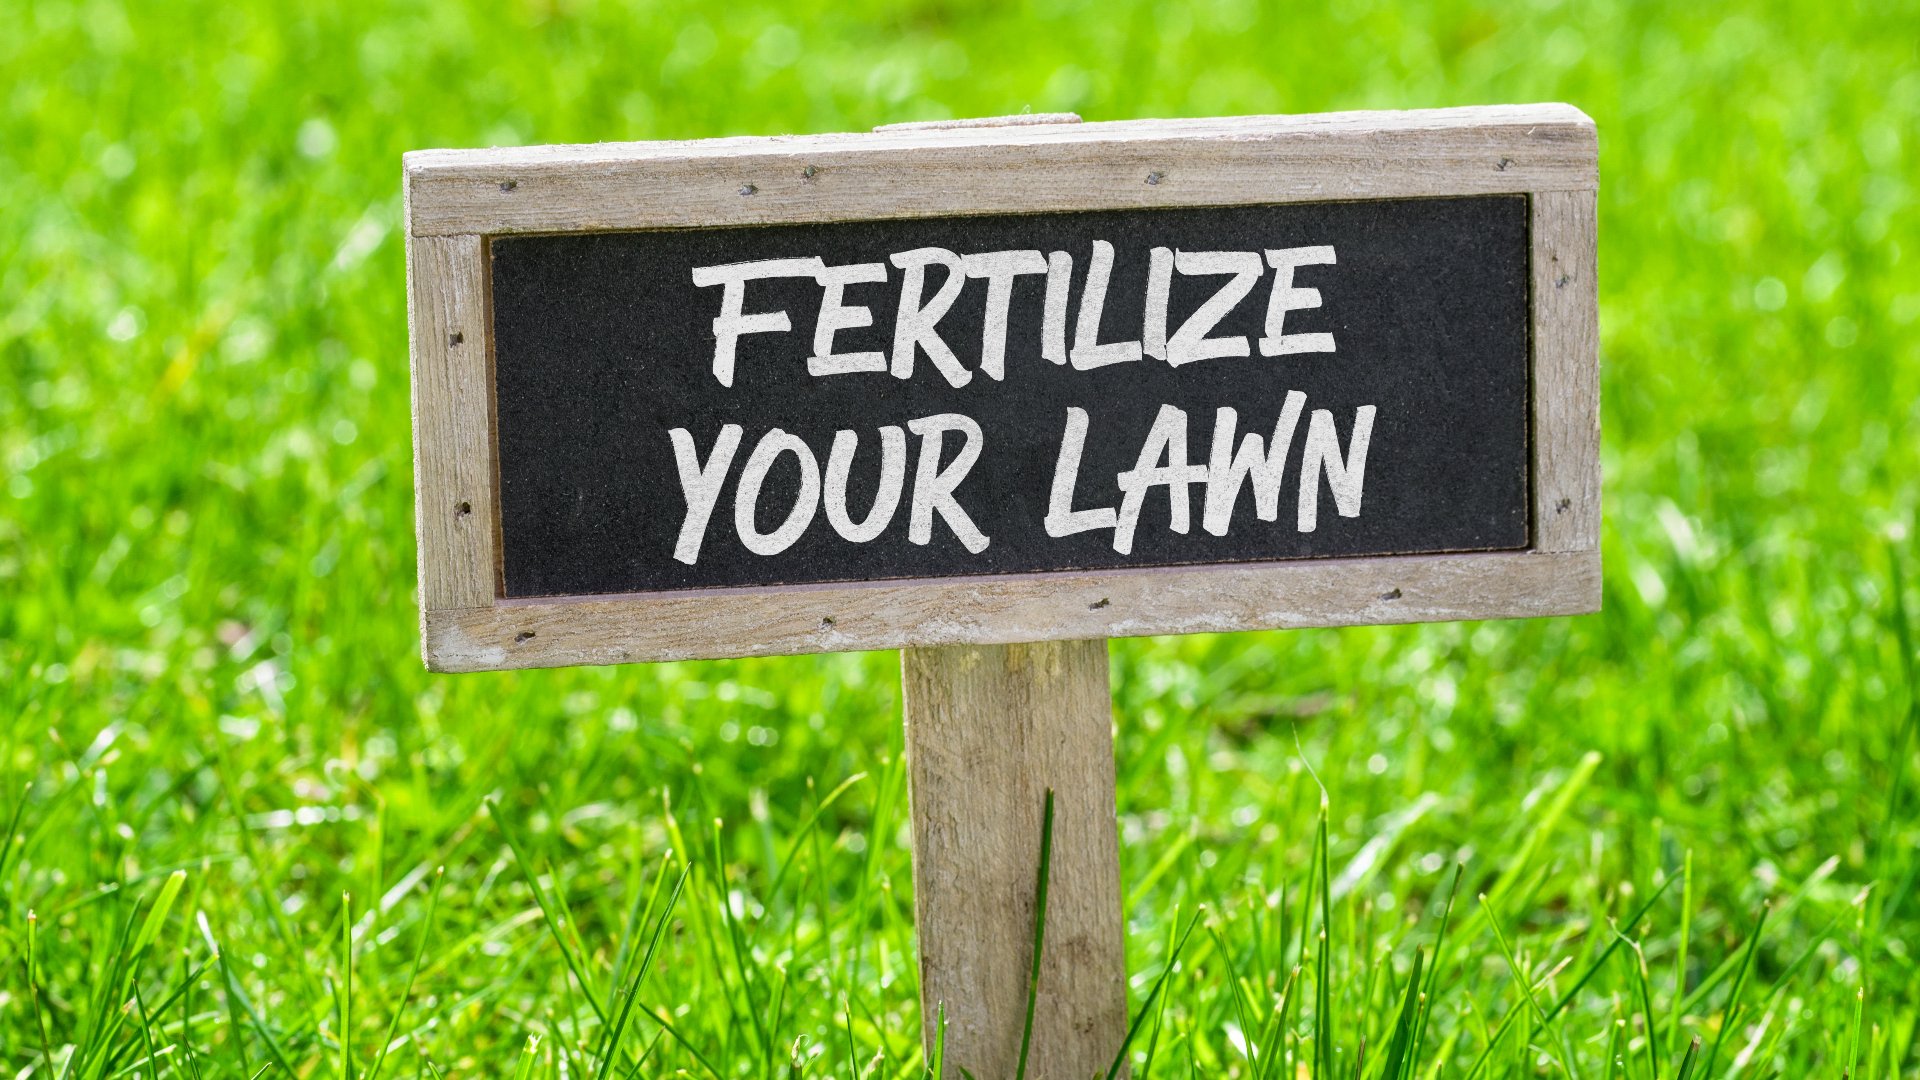 Granular vs Liquid Fertilizer - Which One Is Better for Your Lawn in Iowa?